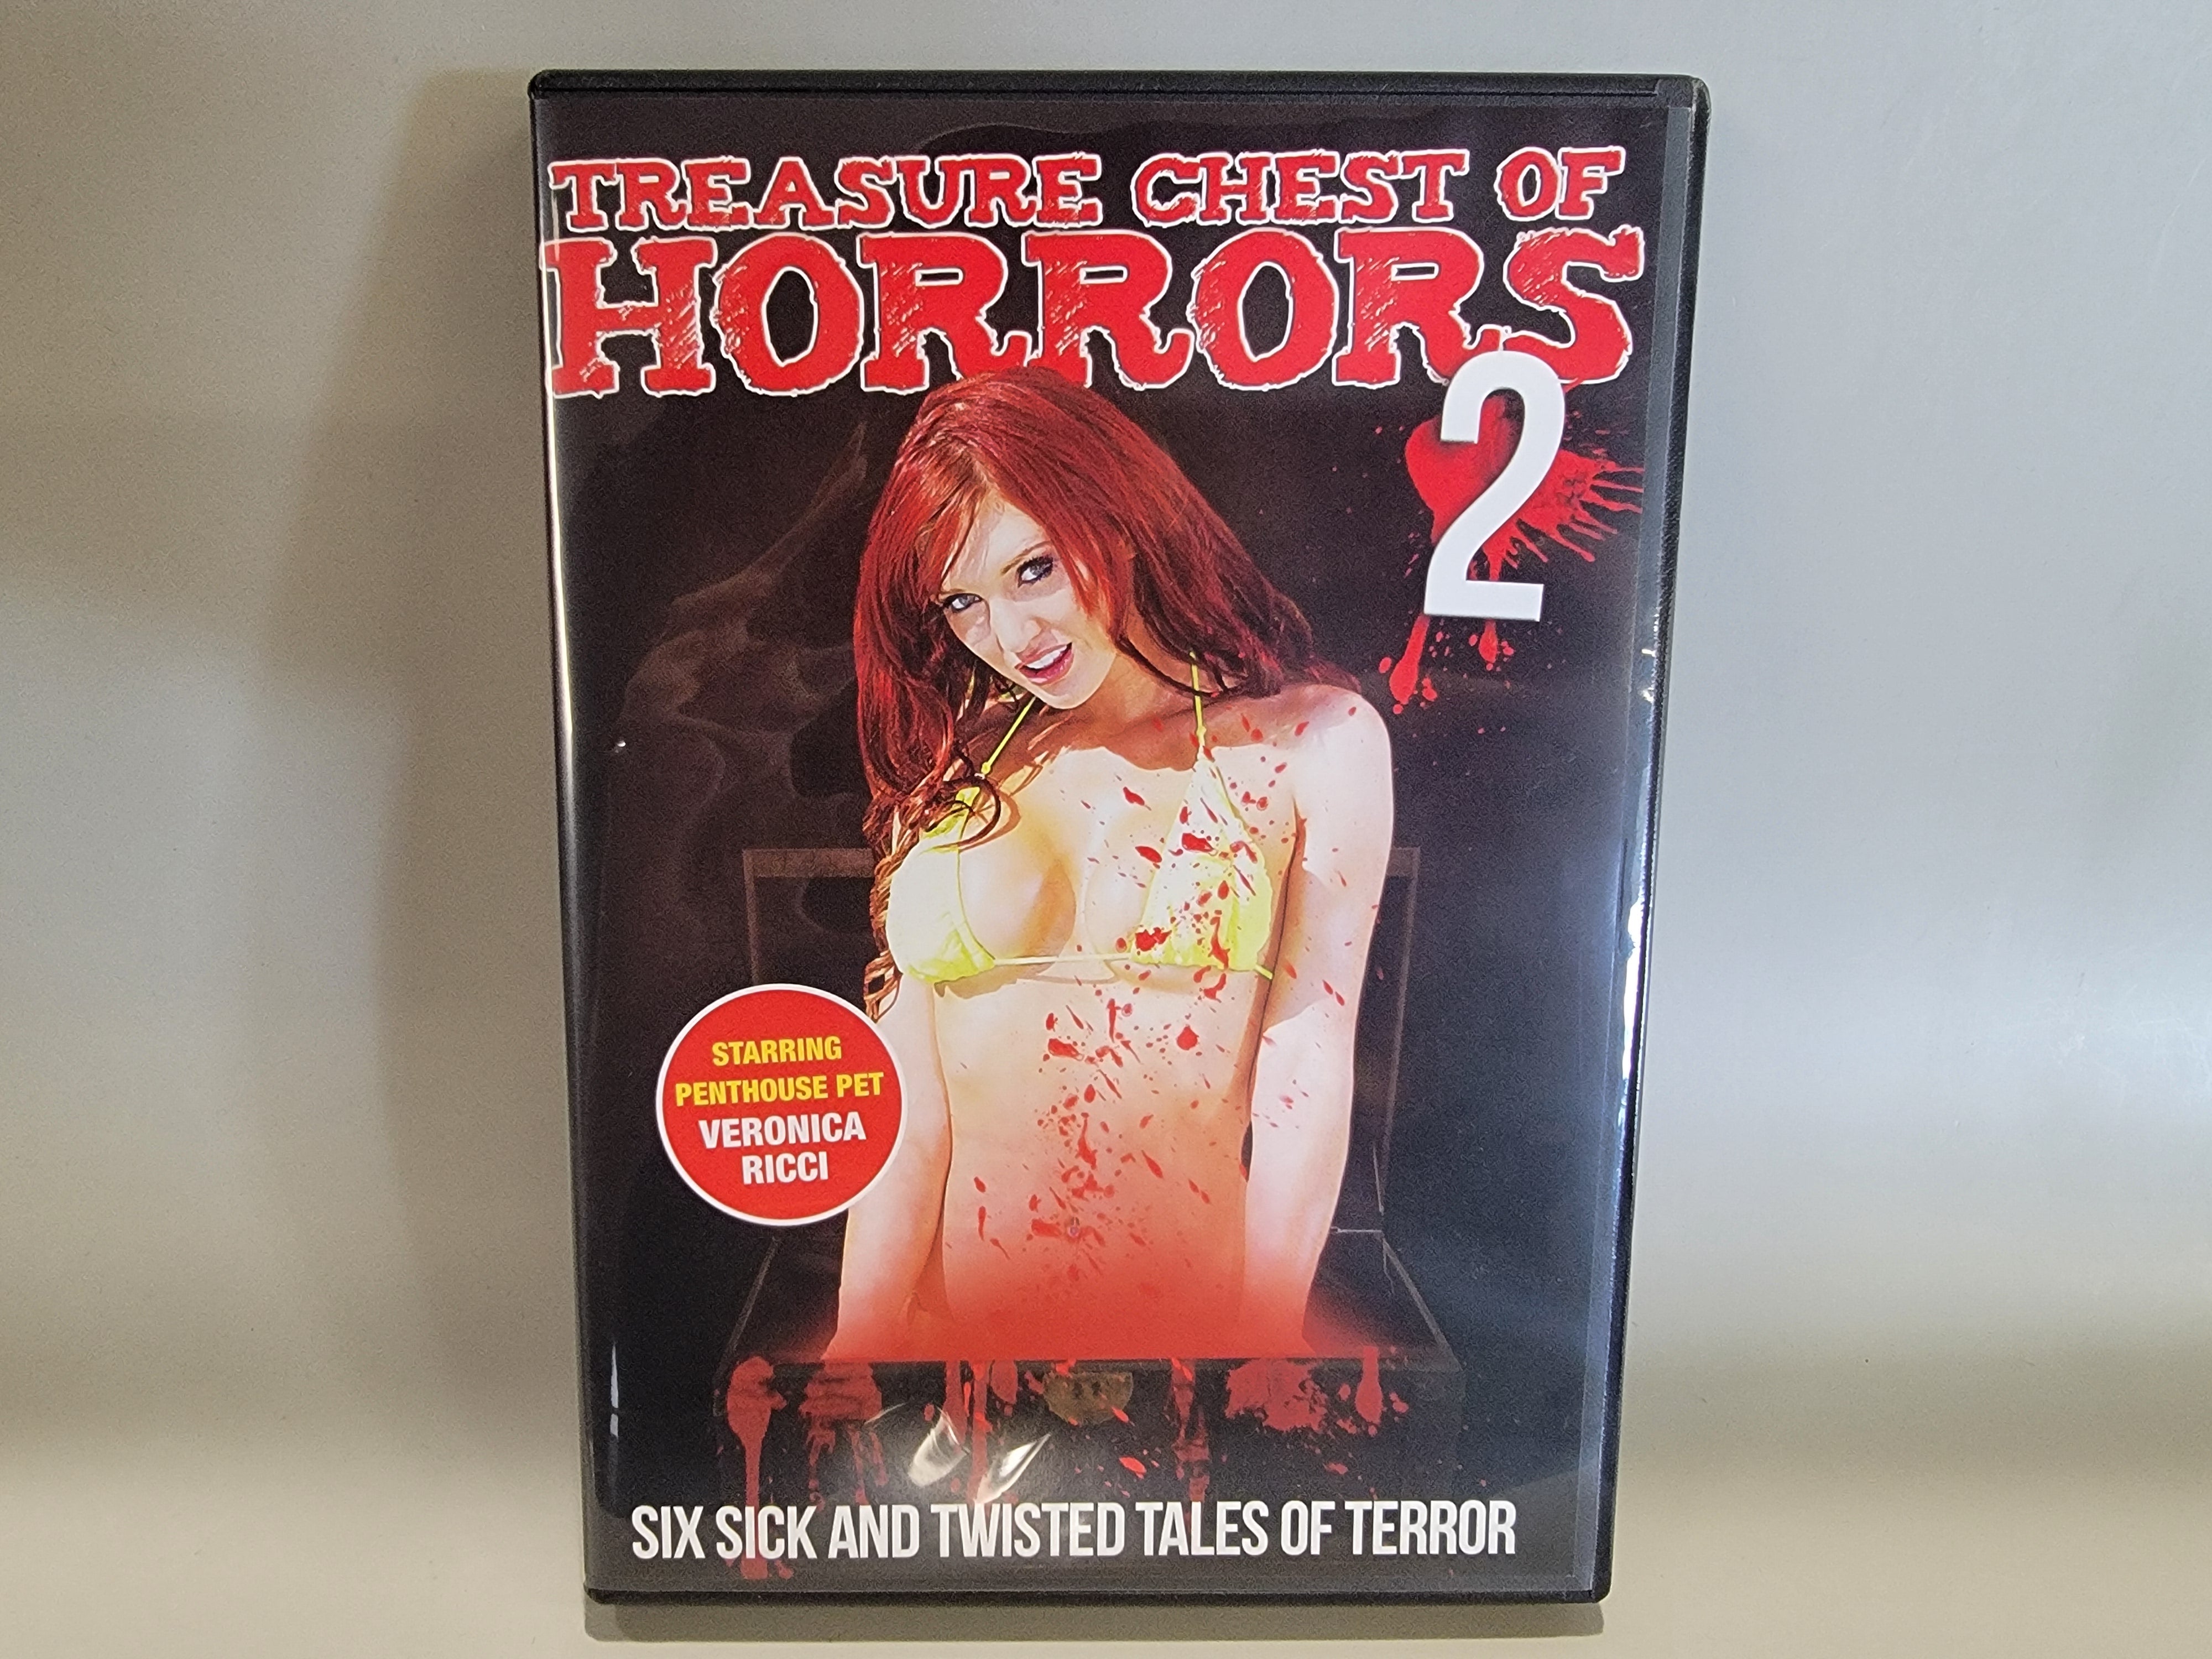 TREASURE CHEST OF HORRORS 2 DVD [USED]